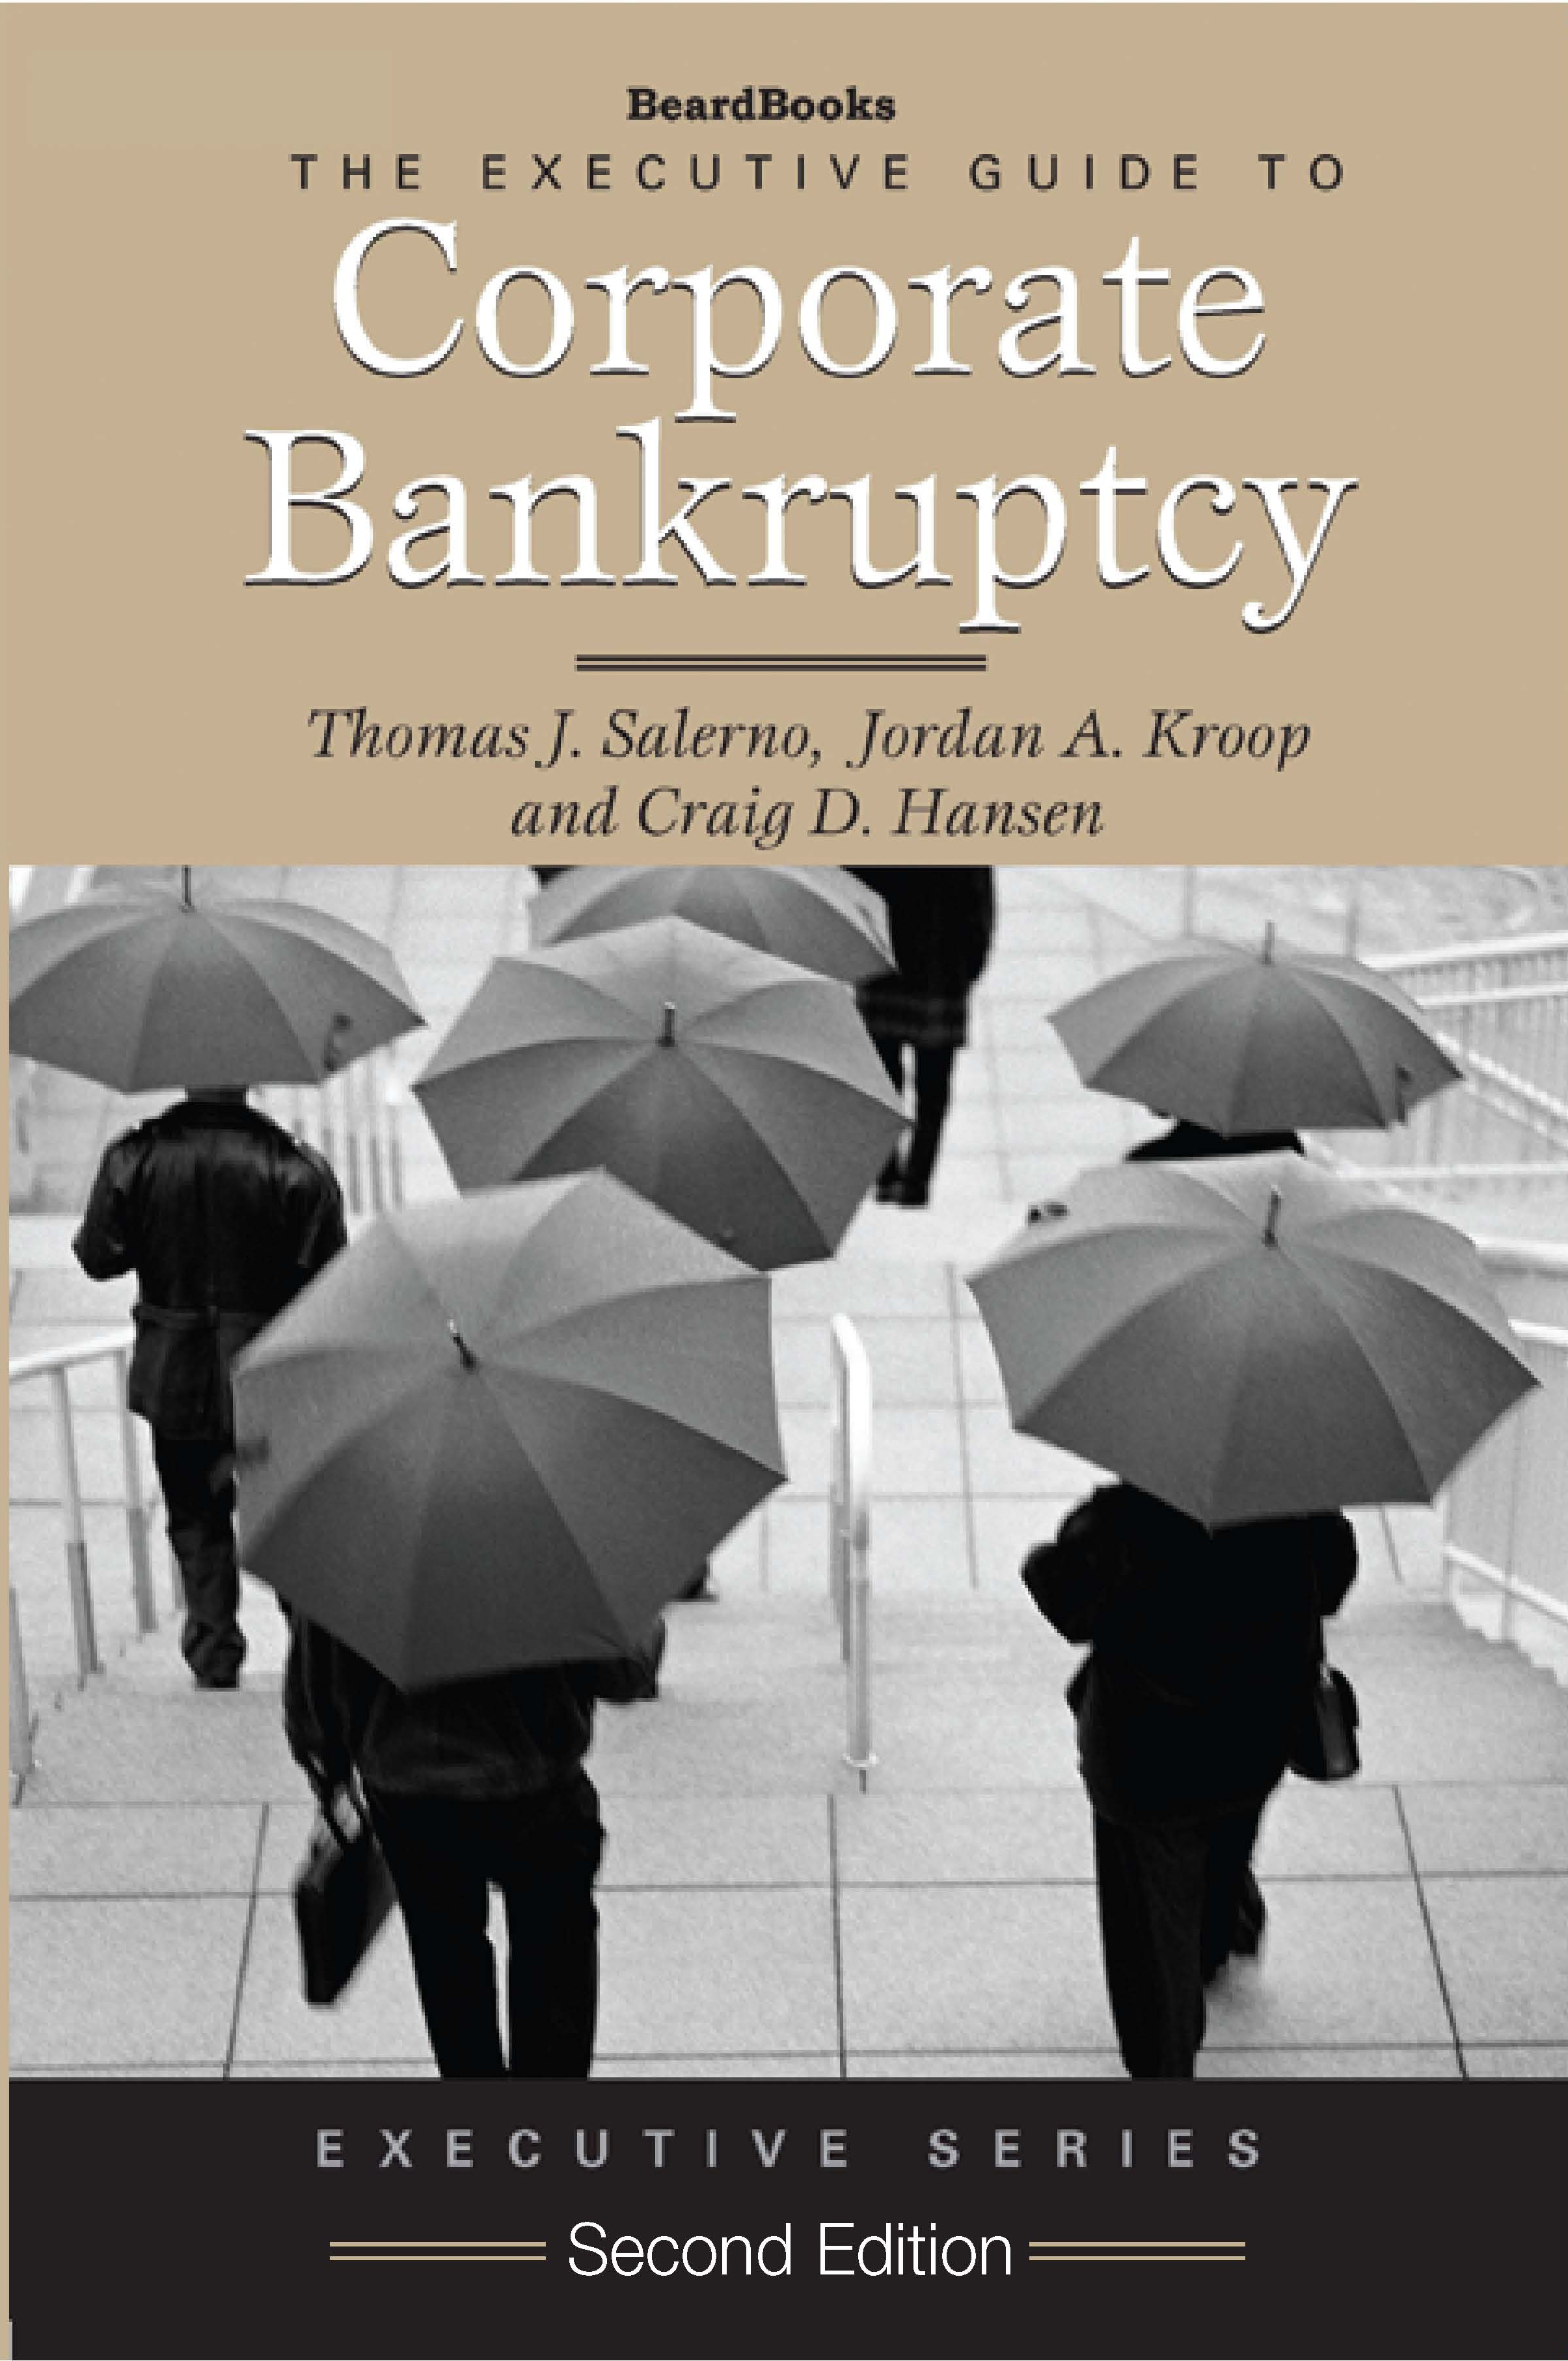 The Executive Guide to Corporate Bankruptcy - Second Edition